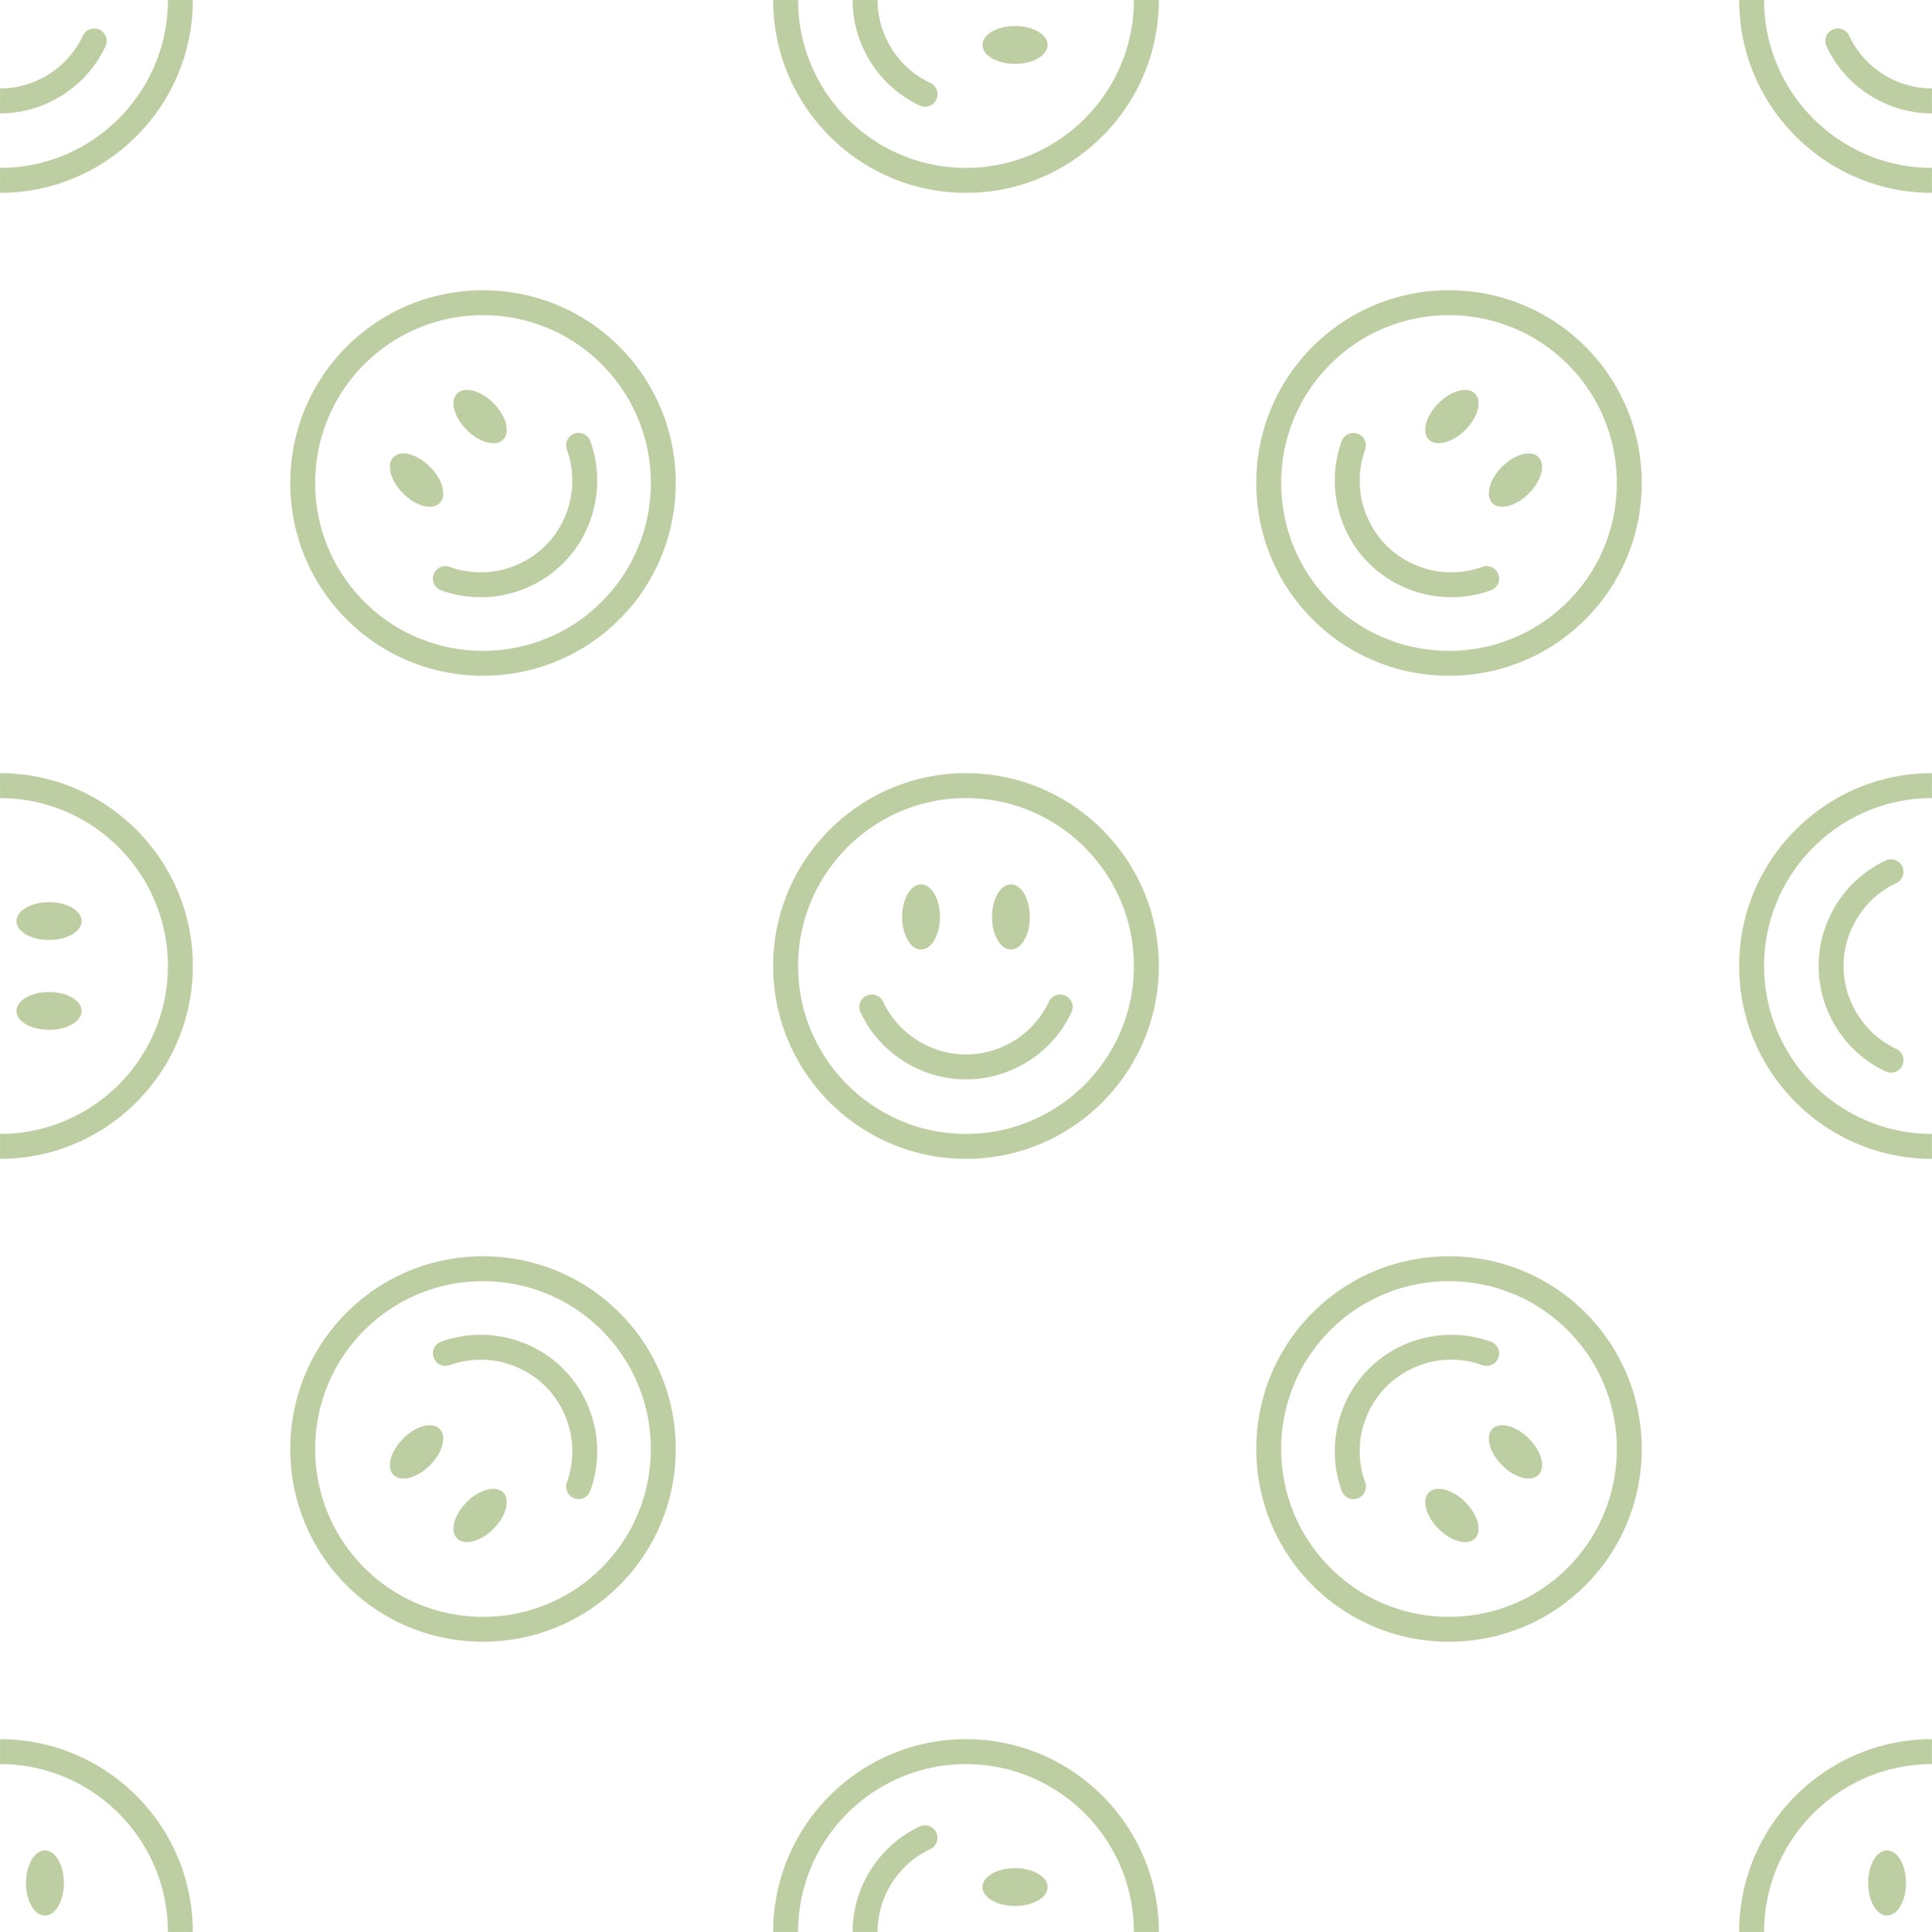 Close-up view of Smiley Wallpaper with a playful pattern of green smiley faces on a light background, providing a clear look at the design